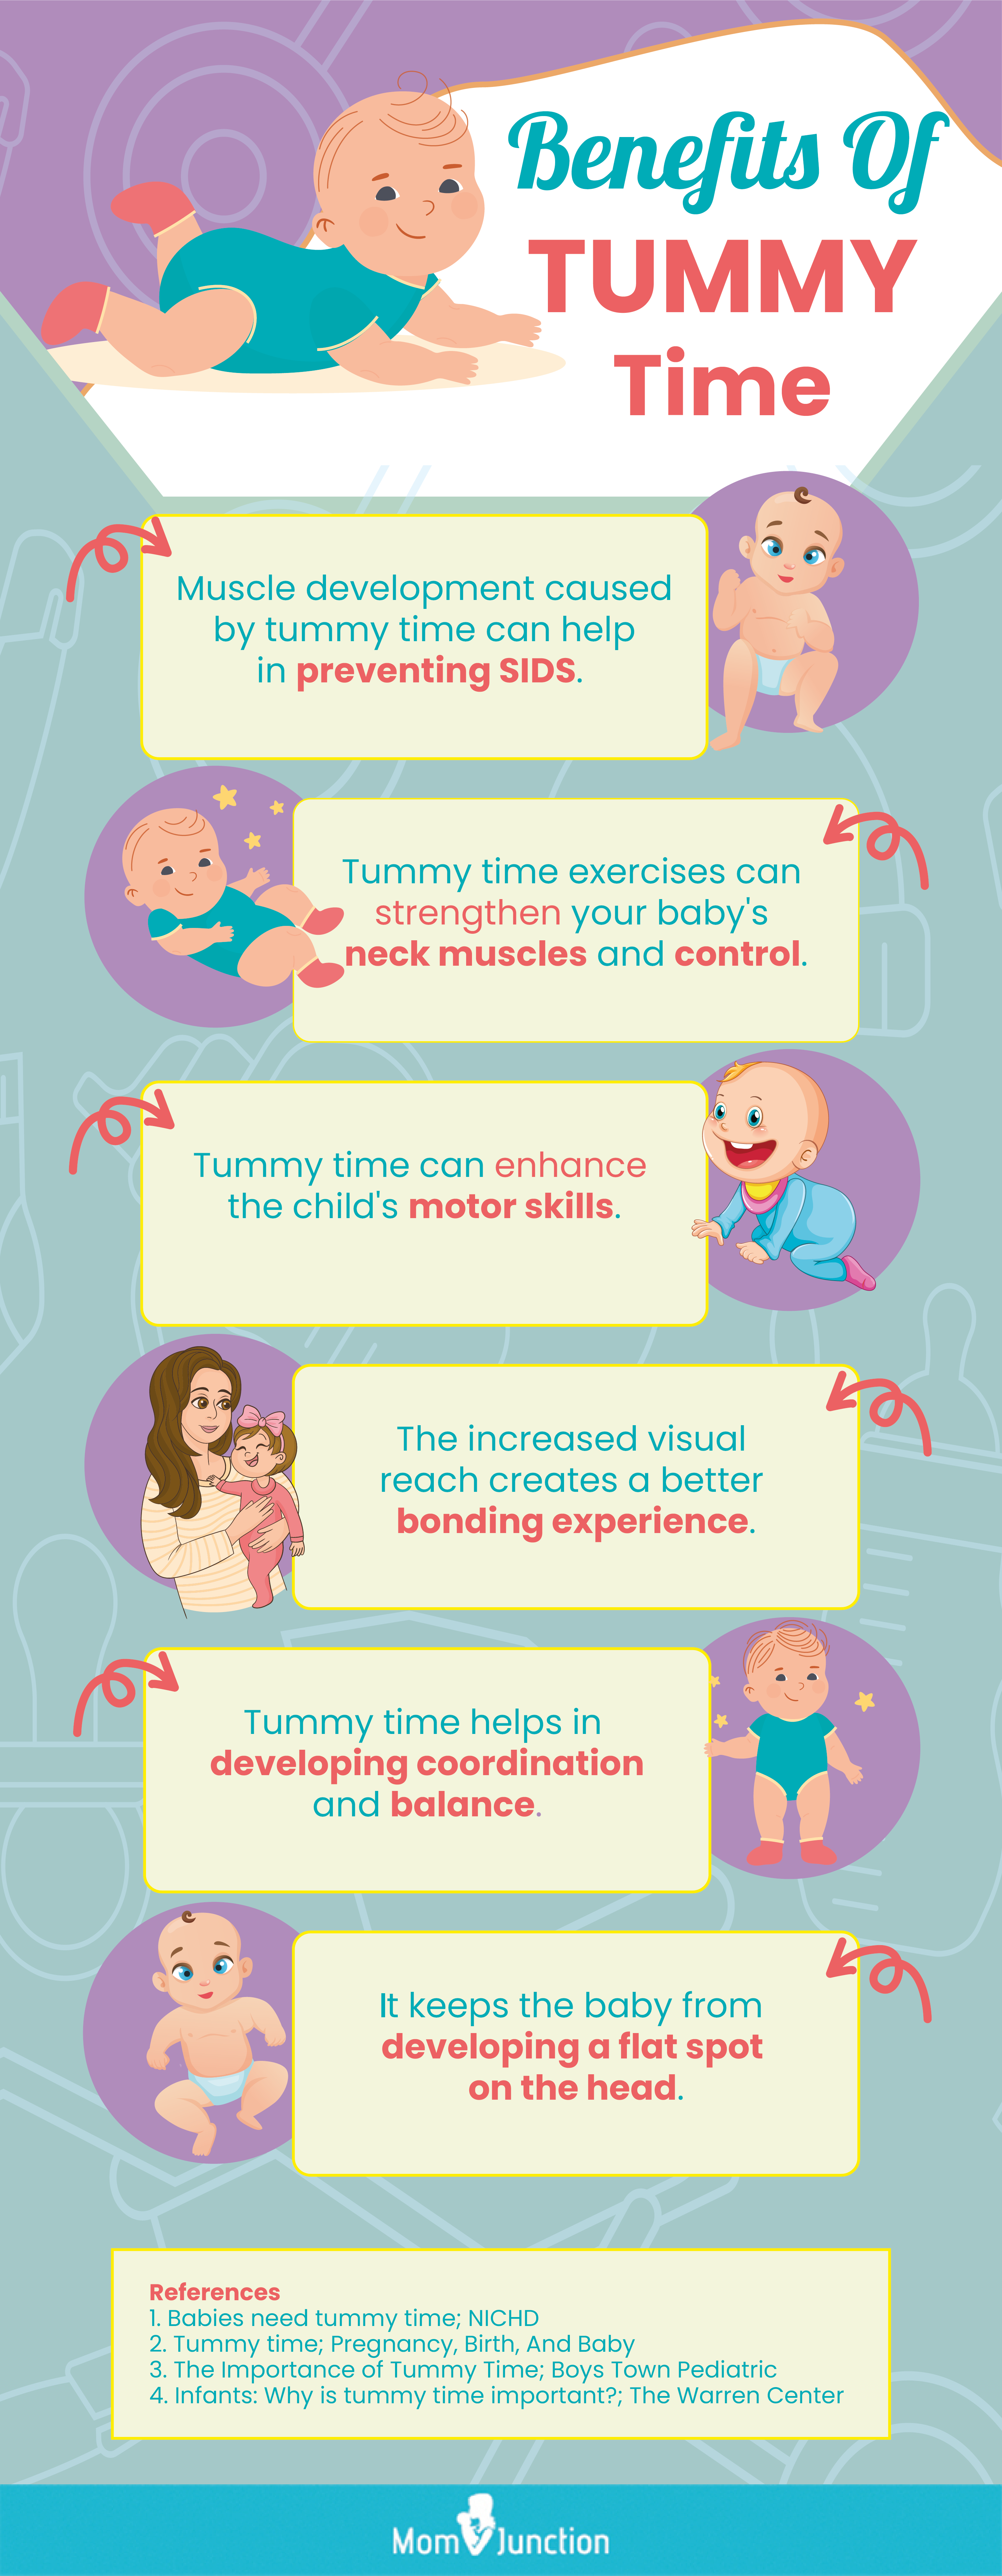 Benefits Of Tummy Time